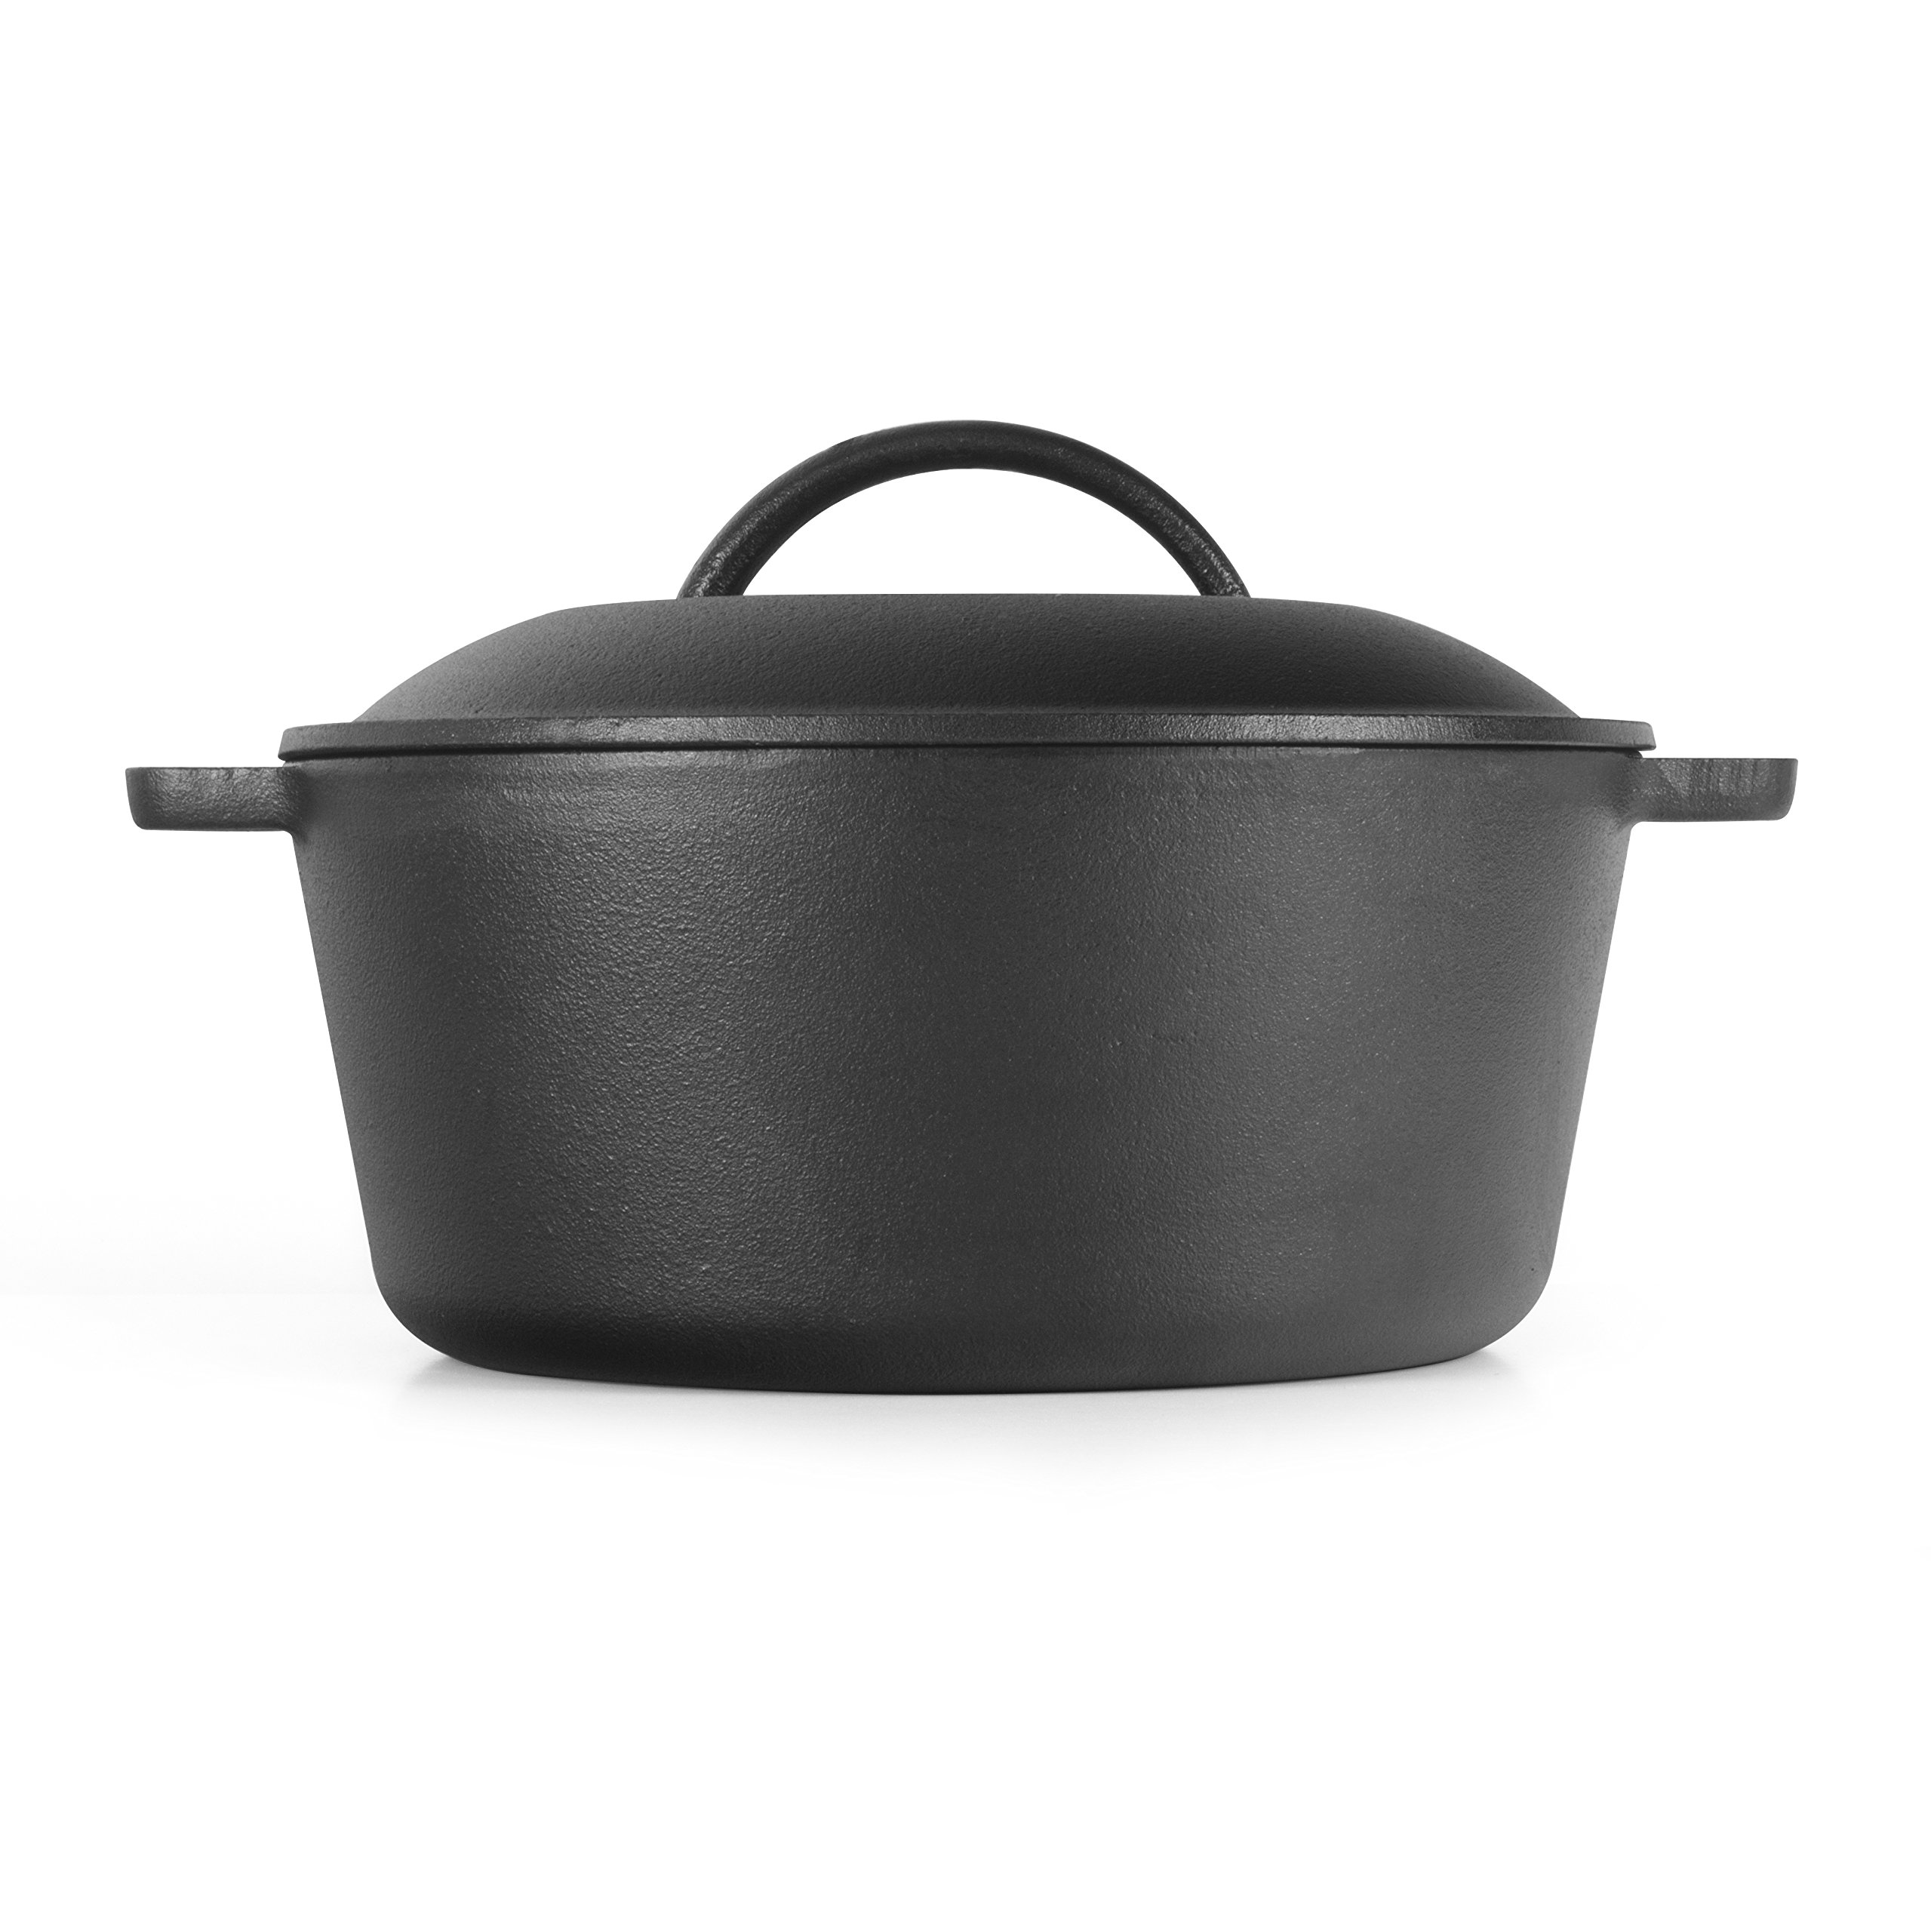 COMMERCIAL CHEF 5 Quart Cast Iron Dutch Oven with Dome Lid & Handles, Preseasoned